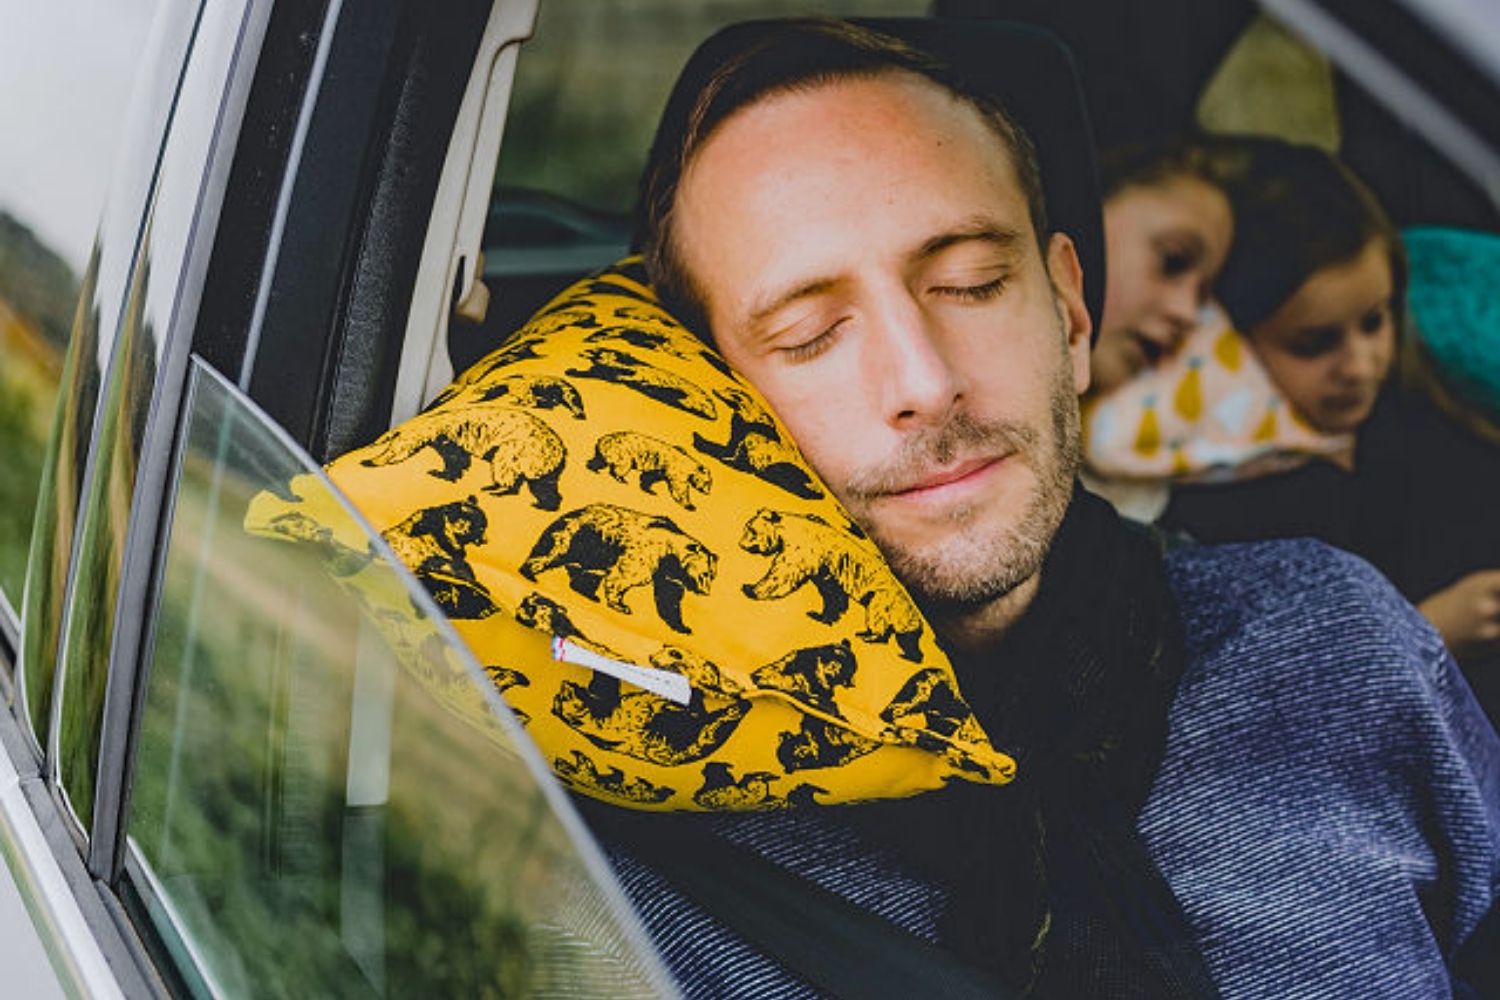 The Best Travel Gifts Option: Road Trip Pillow